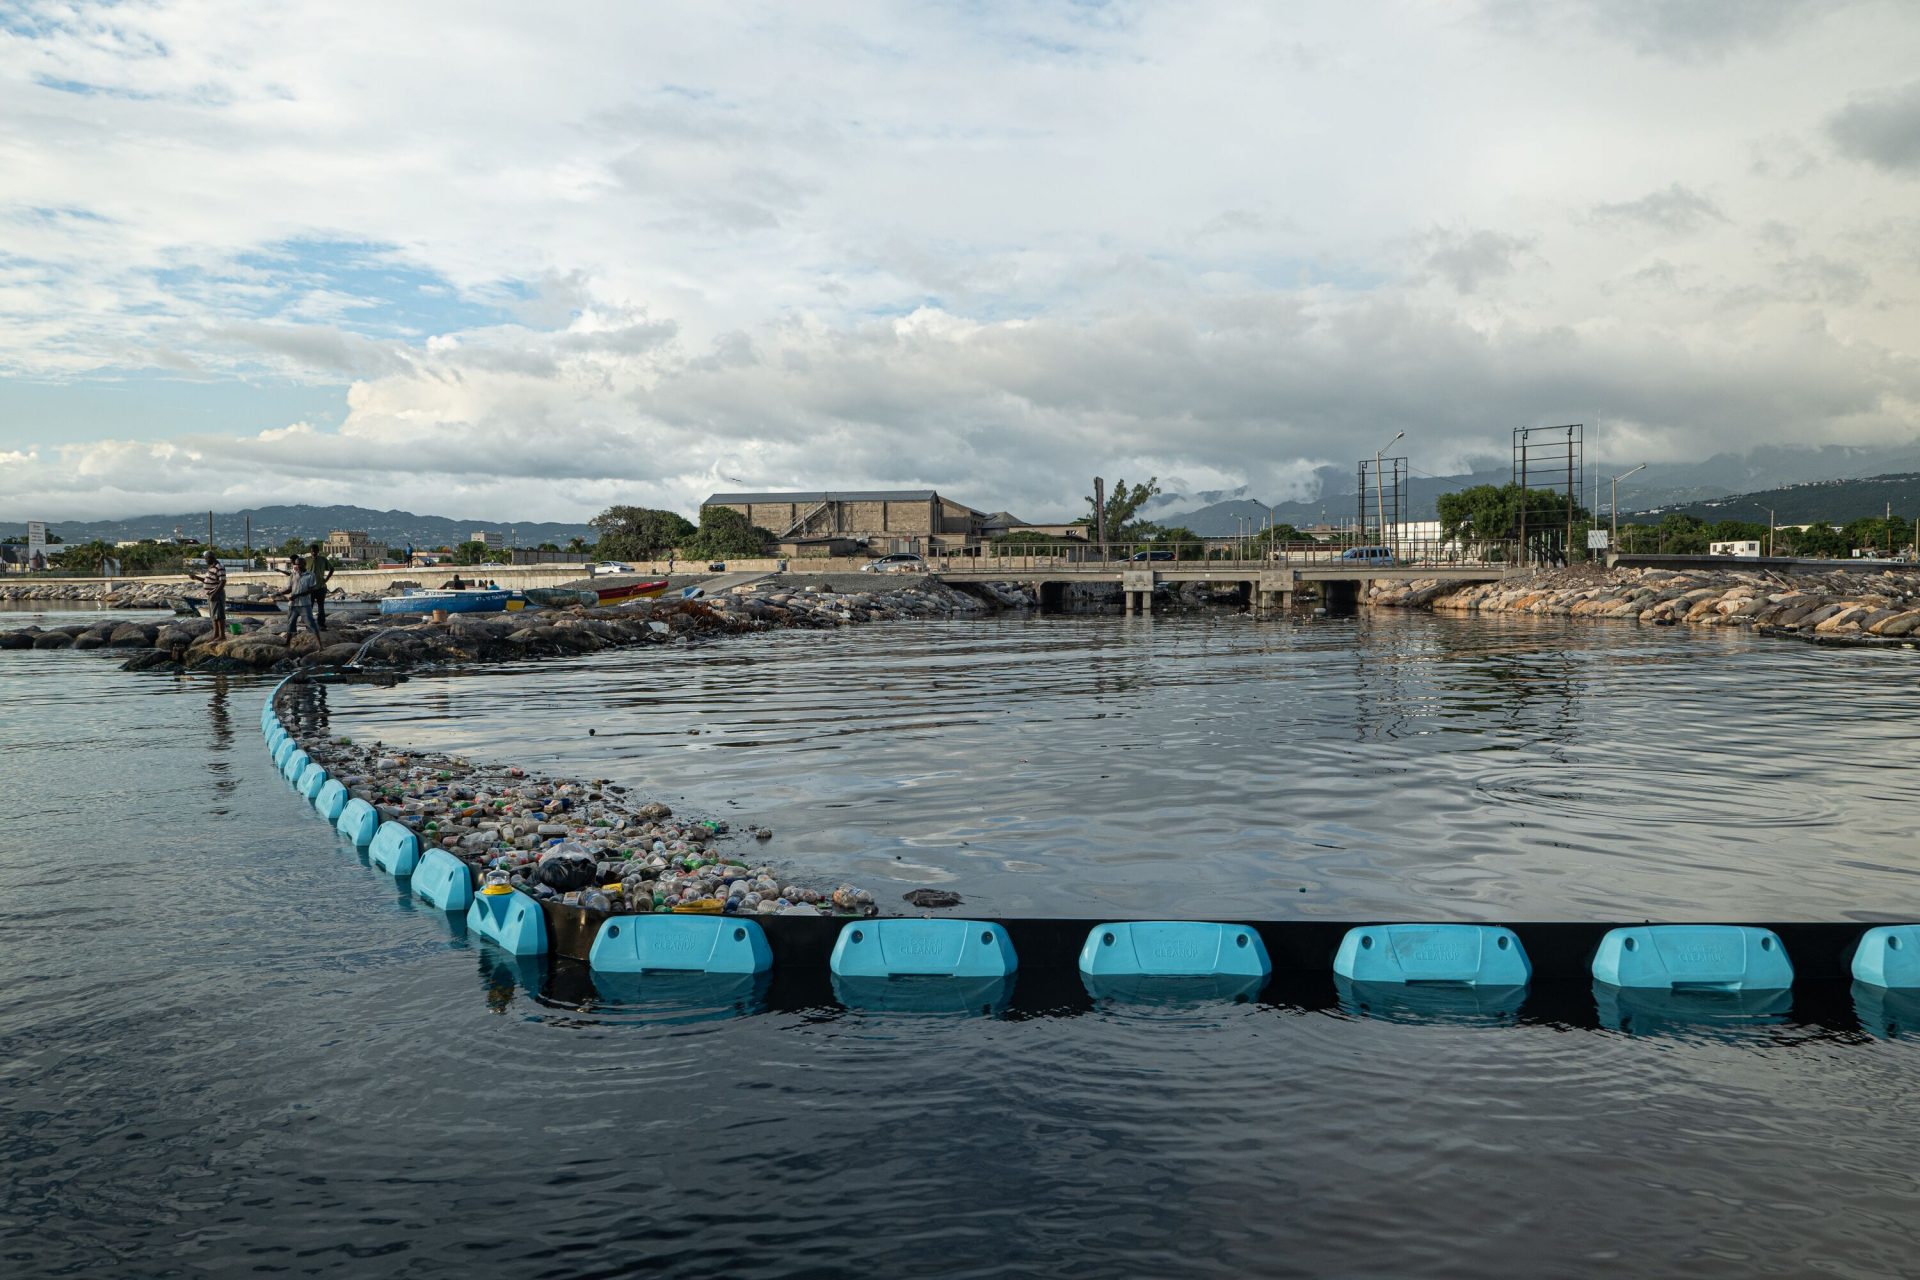 In the coming months, The Ocean Cleanup will be testing the combination of Interceptor Barriers and an Interceptor Tender in three of Kingston’s gullies (Kingston Pen Gully, Barnes Gully, and Rae Town Gully). If results are positive, in 2022 they say they will deploy in all of Kingston’s remaining gullies.